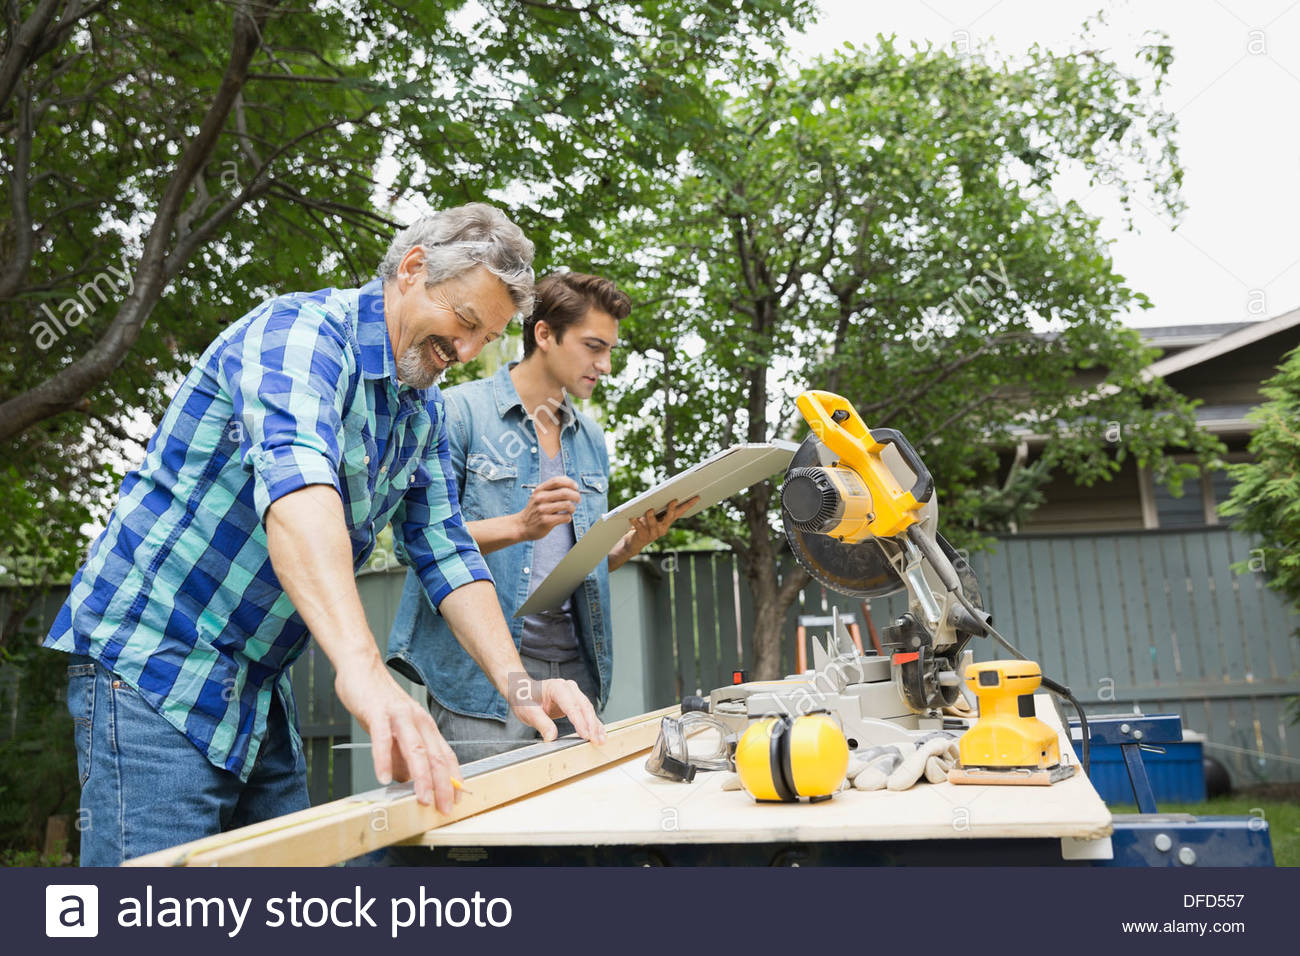 Father and son constructing a project in backyard Stock Photo